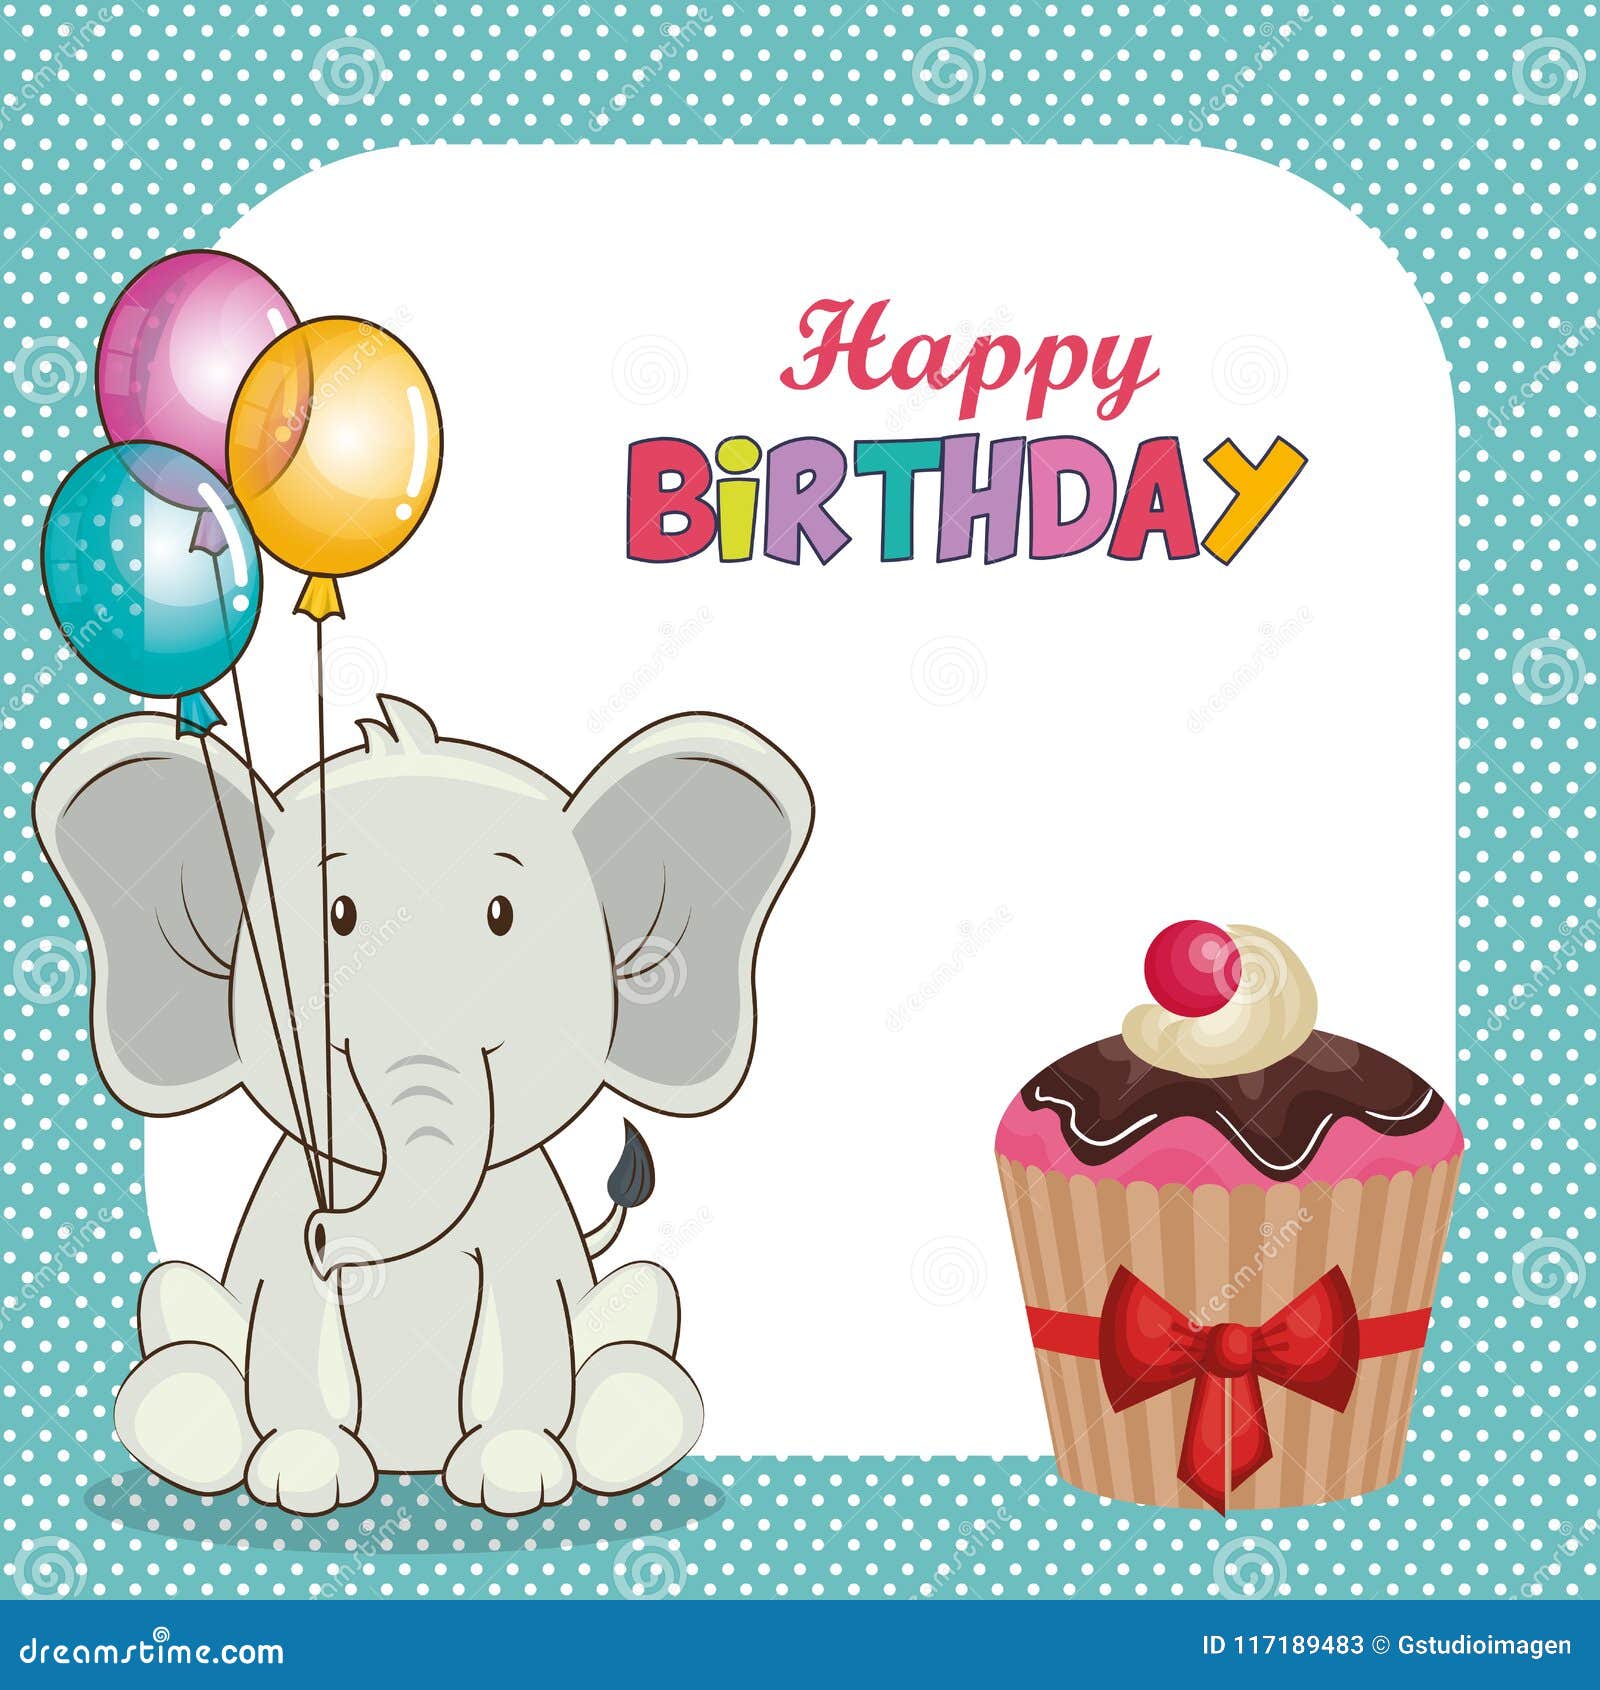 Happy Birthday Card with Cute Elephant Stock Vector - Illustration of ...